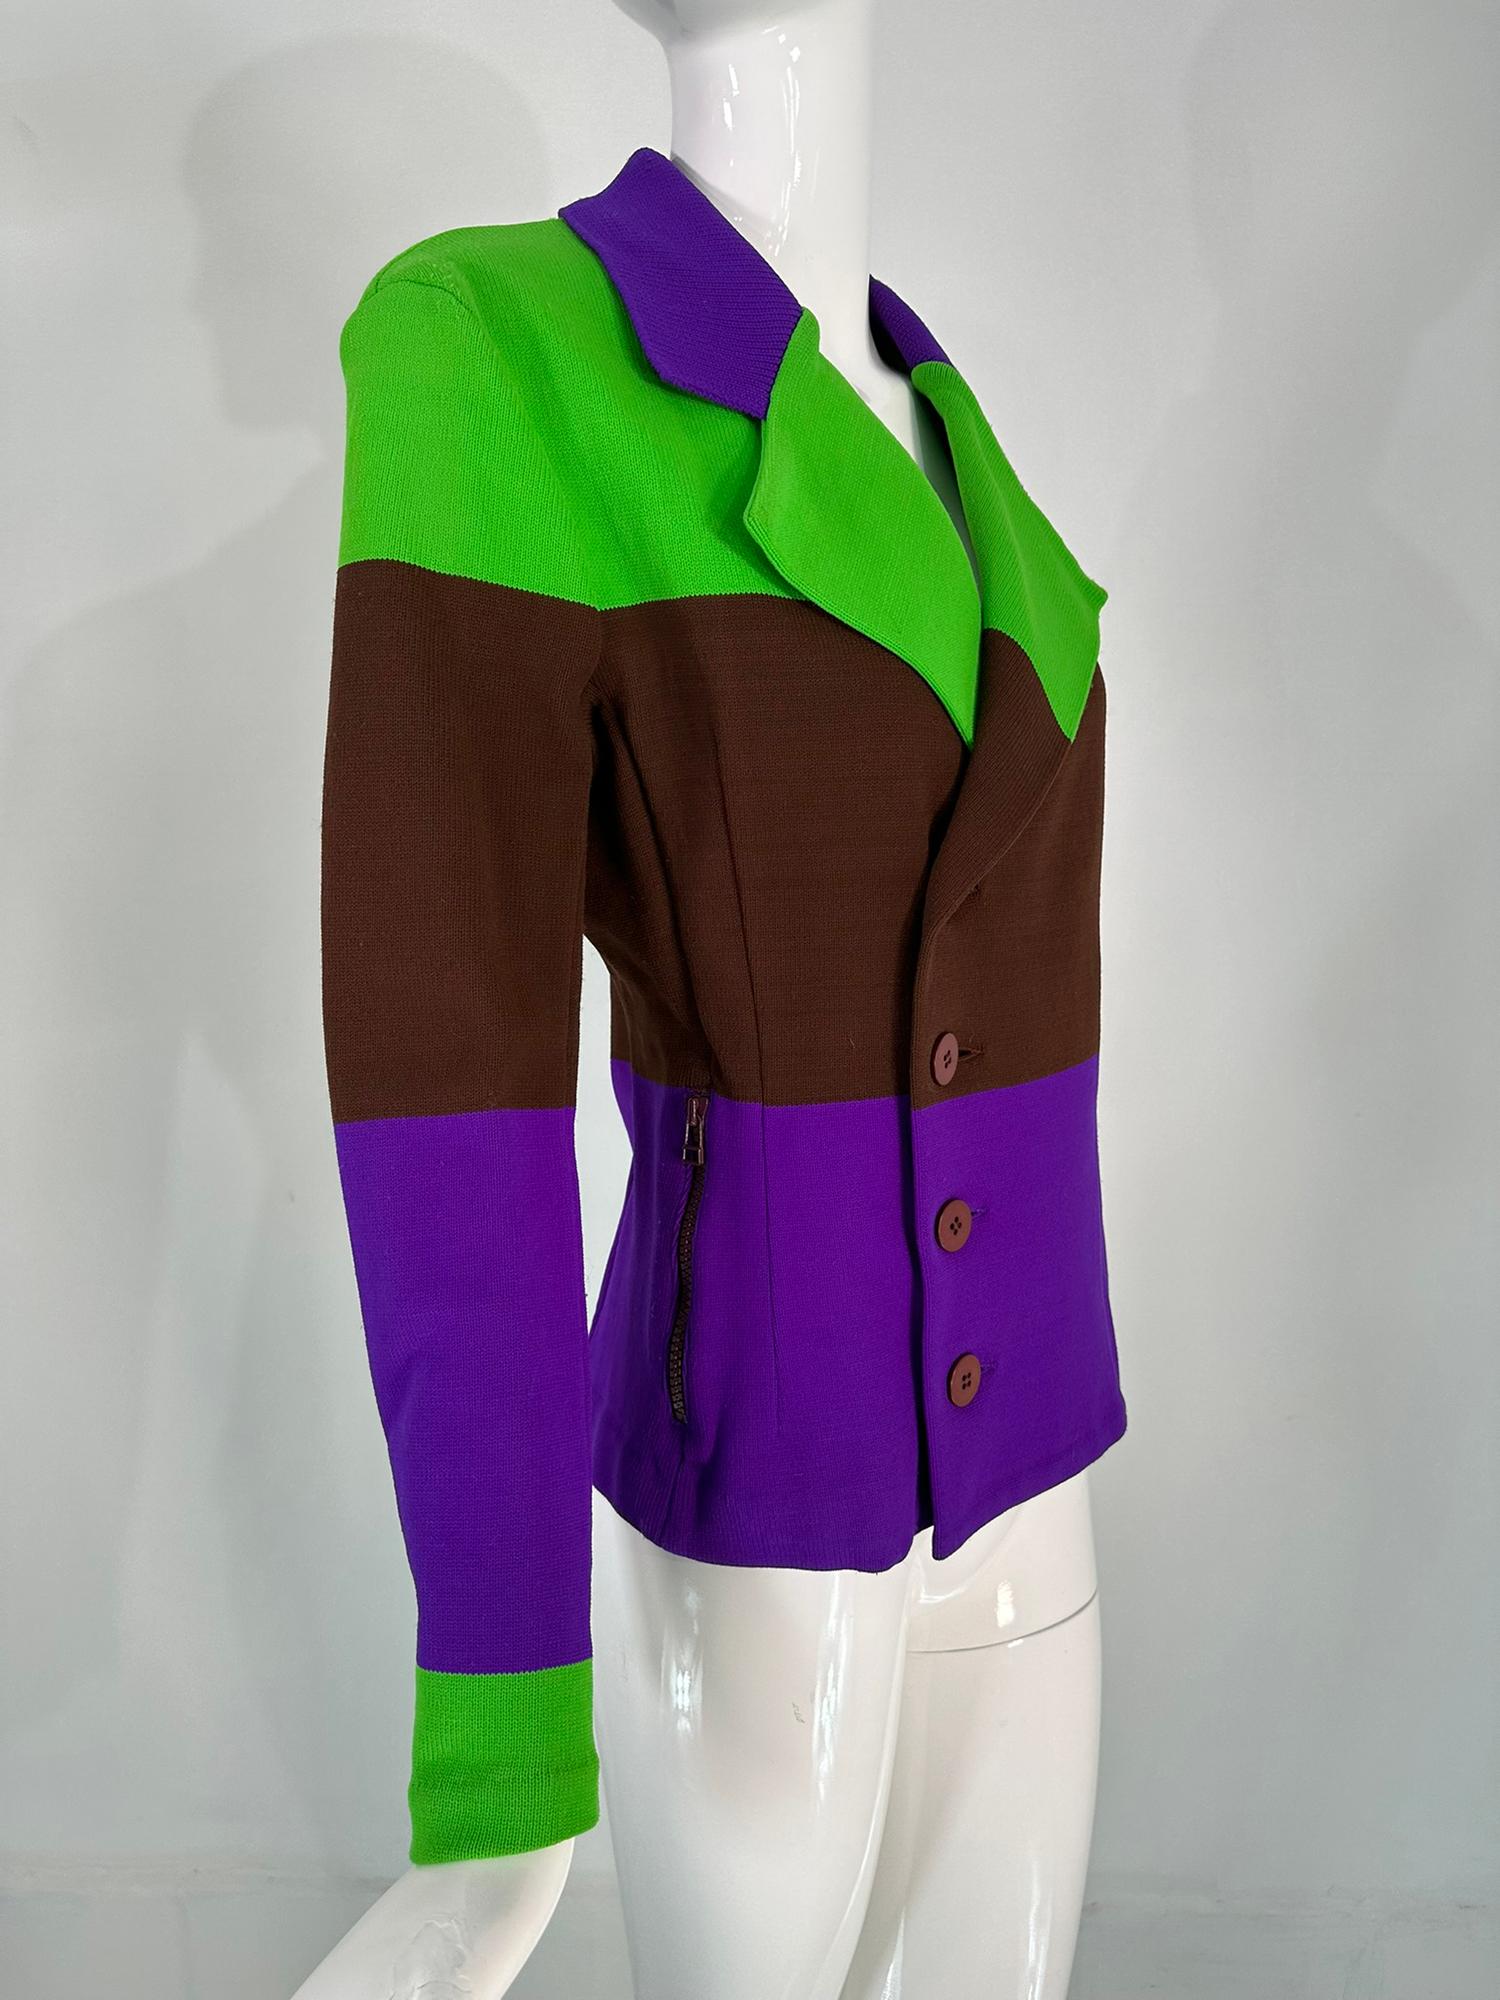 Issey Miyake Colour Block Nylon Knit Jacket in Acid Green Brown & Purple Small In Good Condition For Sale In West Palm Beach, FL